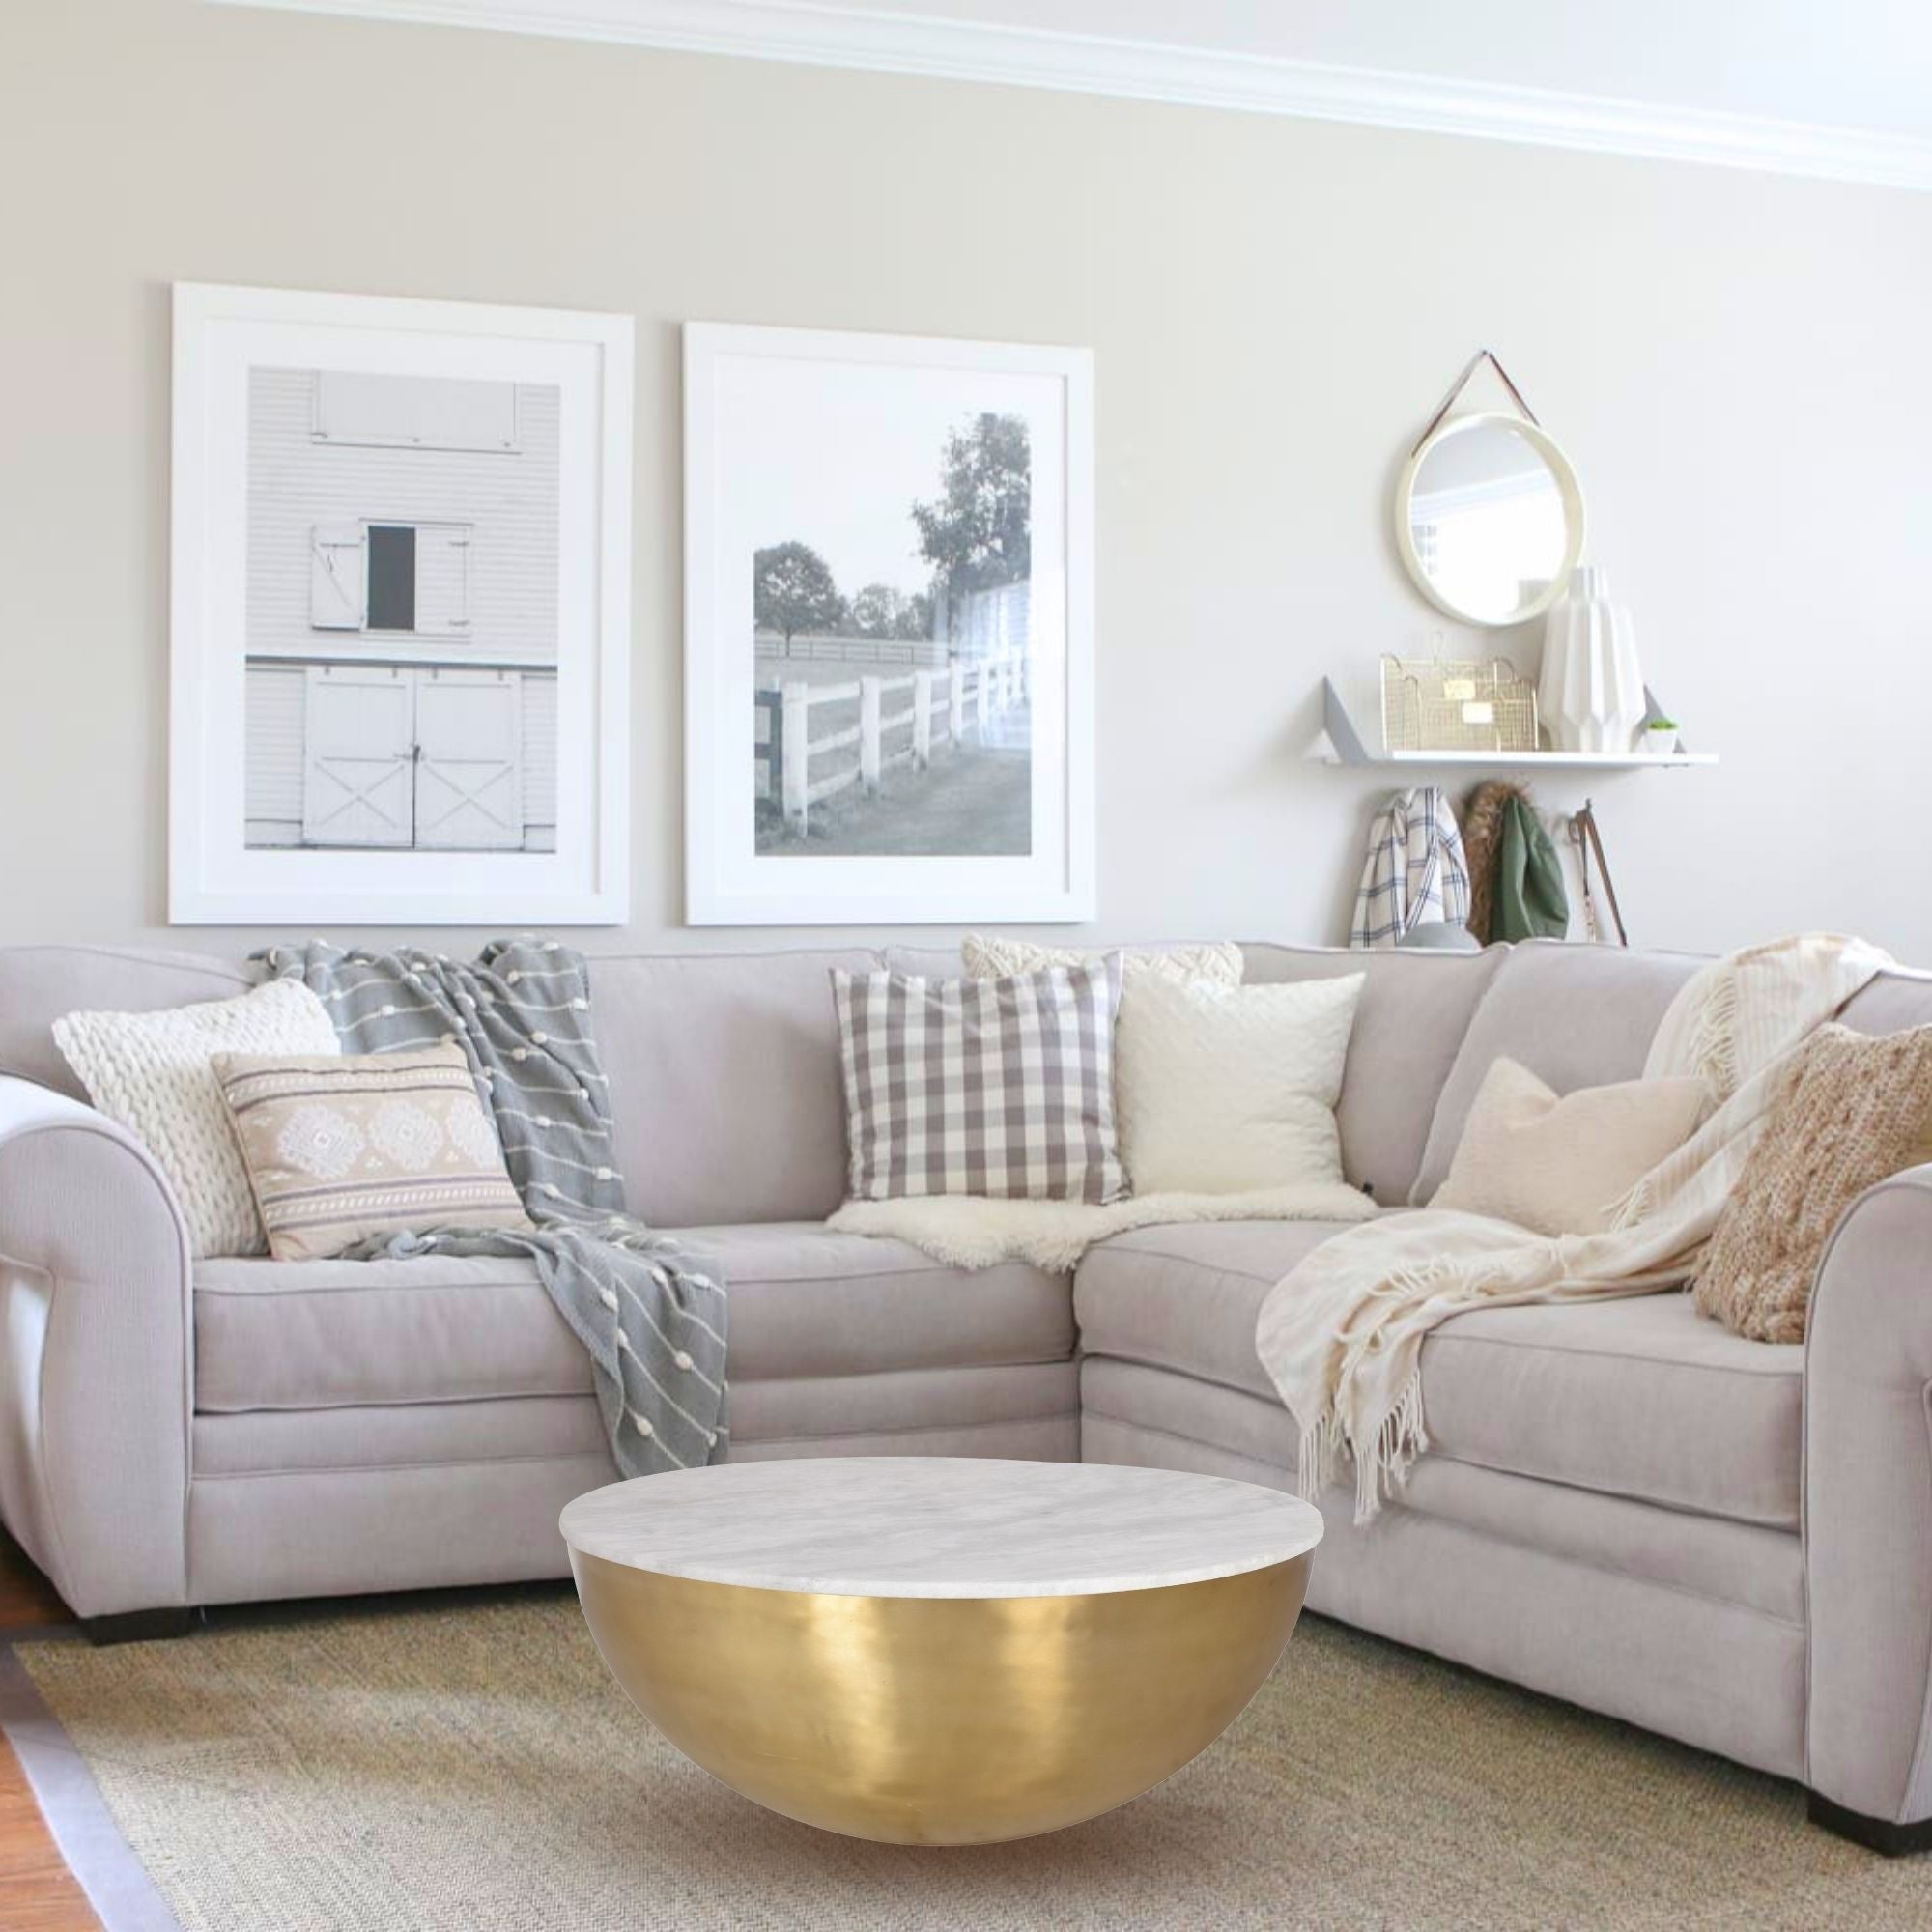 Lia Brass Drum Coffee Table With Marble Top